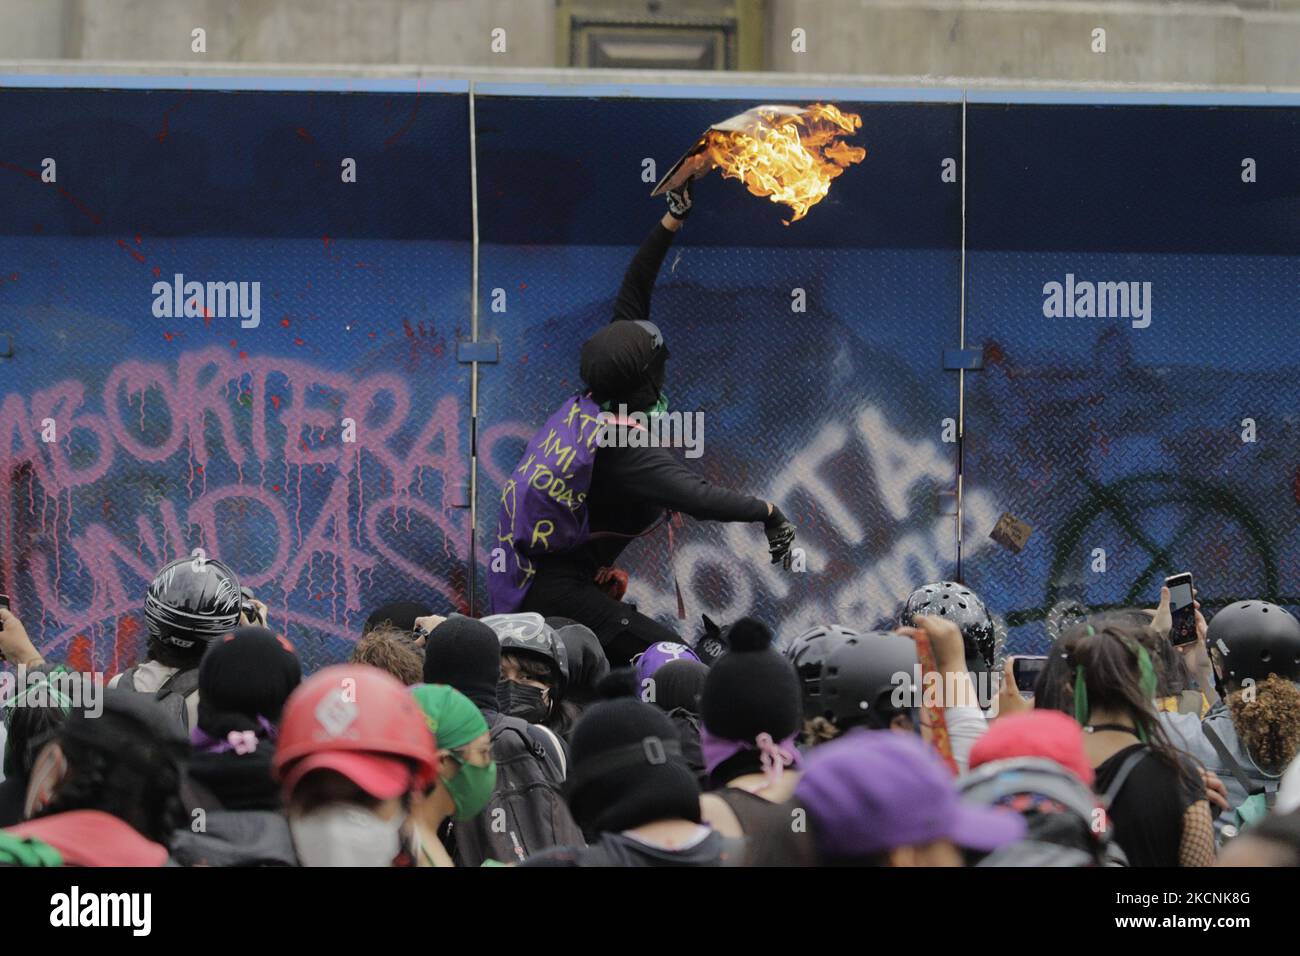 A woman from the feminist Black Bloc sets fire in front of fences placed under the Angel of Independence in Mexico City, on the occasion of the Global Day of Action in favour of legal, free and safe abortion in Mexico and Latin America. During the march, there were clashes between demonstrators and police along the route. (Photo by Gerardo Vieyra/NurPhoto) Stock Photo